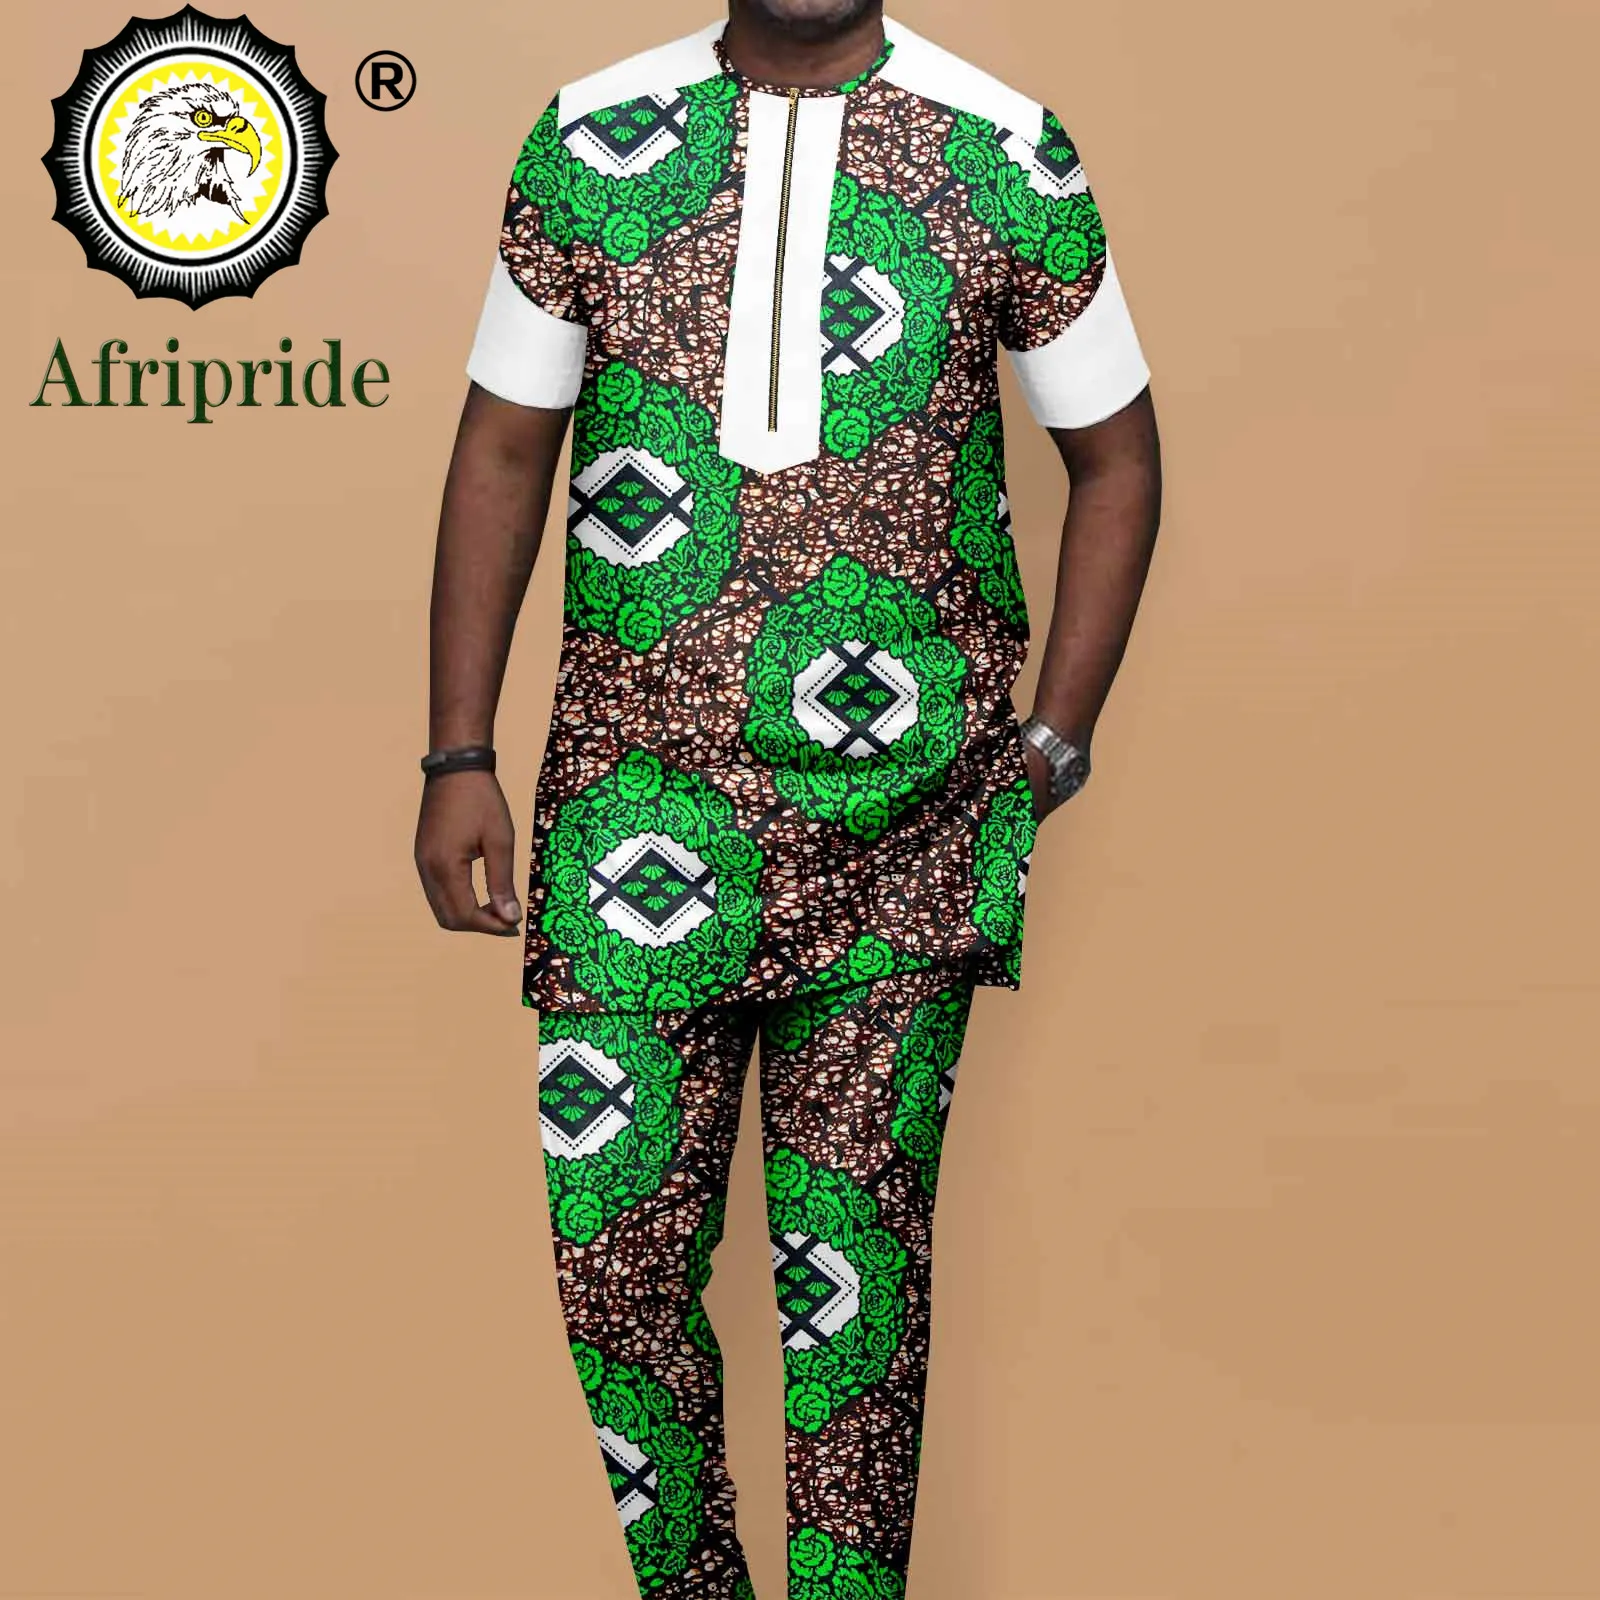 African Tracksuit for Men Dashiki Print Shirts and Ankara Pants Tracksuit Tribal Outwear Plus Size Casual Clothes A2216031 men s casual tracksuit african clothing dashiki printed tops pants 2 piece set ankara shirts blouse tribal outfits a2216031